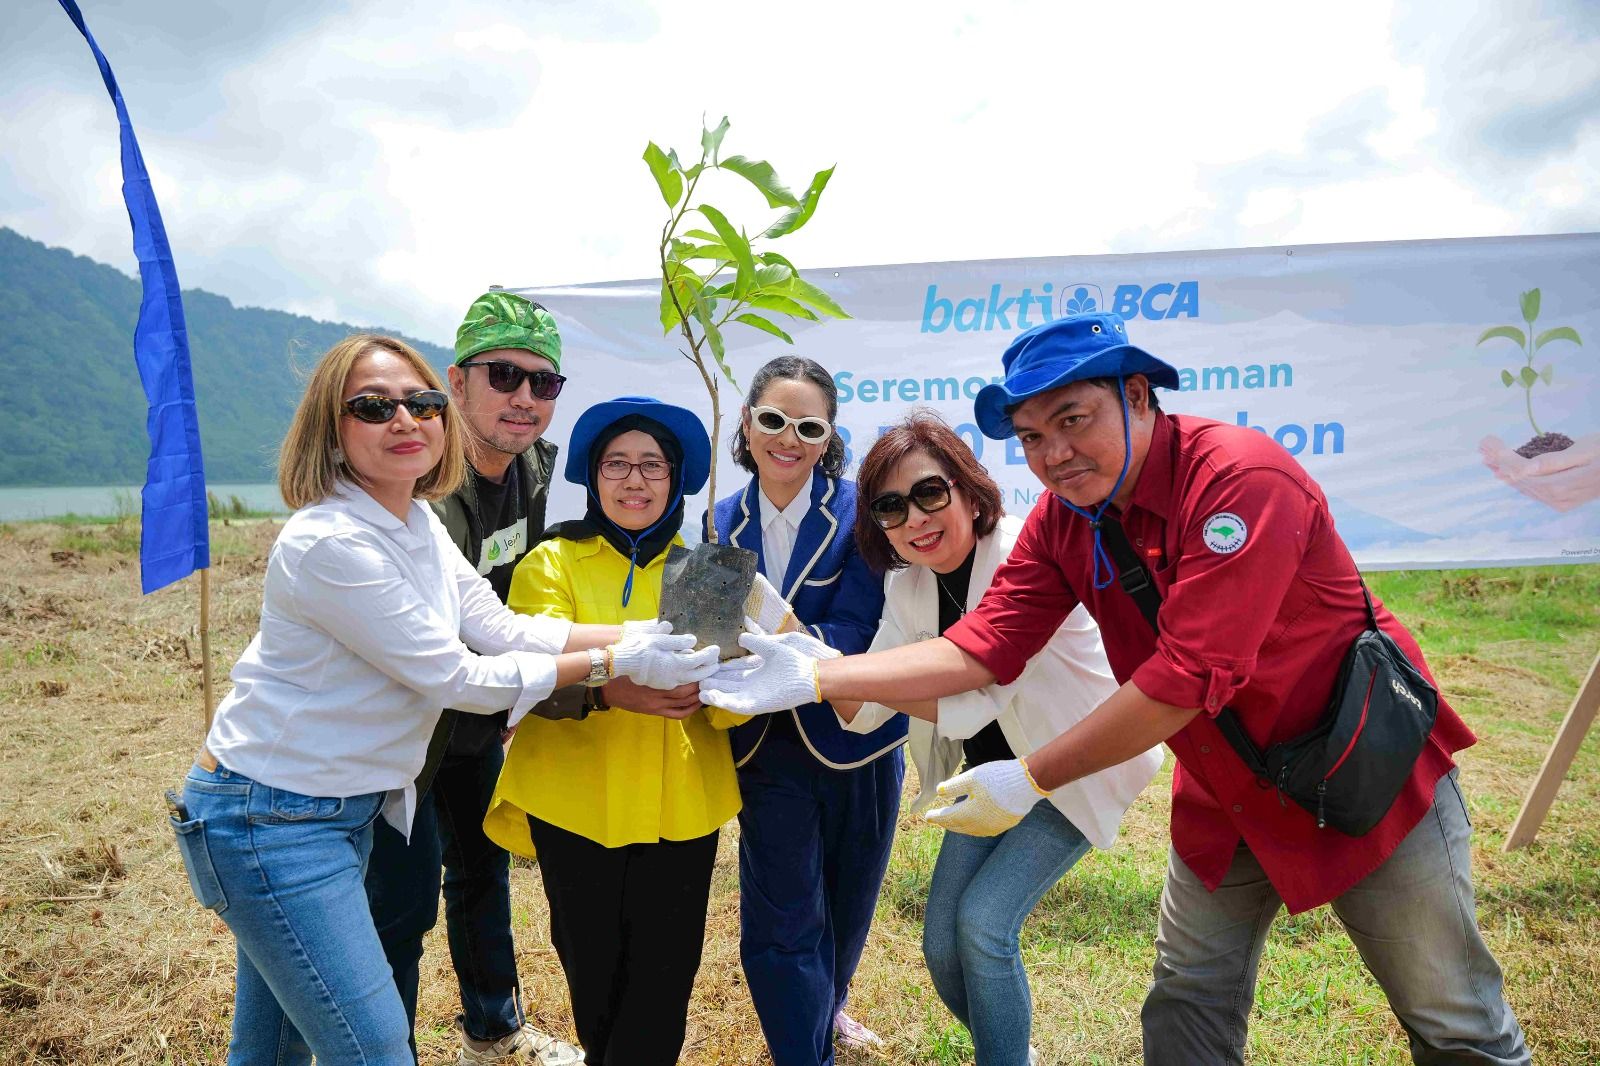 Committed to Preserving the Environment, BCA Takes Green Action by Planting 38,500 Trees in Bali - Director of Islamic Financing at the Directorate General of Budget Financing and Risk Management (DJPPR) of the Indonesian Ministry of Finance Dwi Irianti Hadiningdyah (third left), representative from the Bali I Provincial Environment and Forestry Office I Gusti Ketut Wiguna (right), BCA EVP of Corporate Communication & Social Responsibility Hera F. Haryn (left), BCA EVP of Wealth Management Ugahary Yovvy Chandra (second right), CEO of Jejakin Arfan Arlanda (second left), dan singer Andien (third right) during a tree-planting ceremony in Bali on Thursday (23/11). PT Bank Central Asia Tbk (BCA) took green action by planting 38,500 trees in six villages in Denbukit, Buleleng, Bali. The activity is one of the BCA’s commitments to always actively participate in environmental conservation efforts.